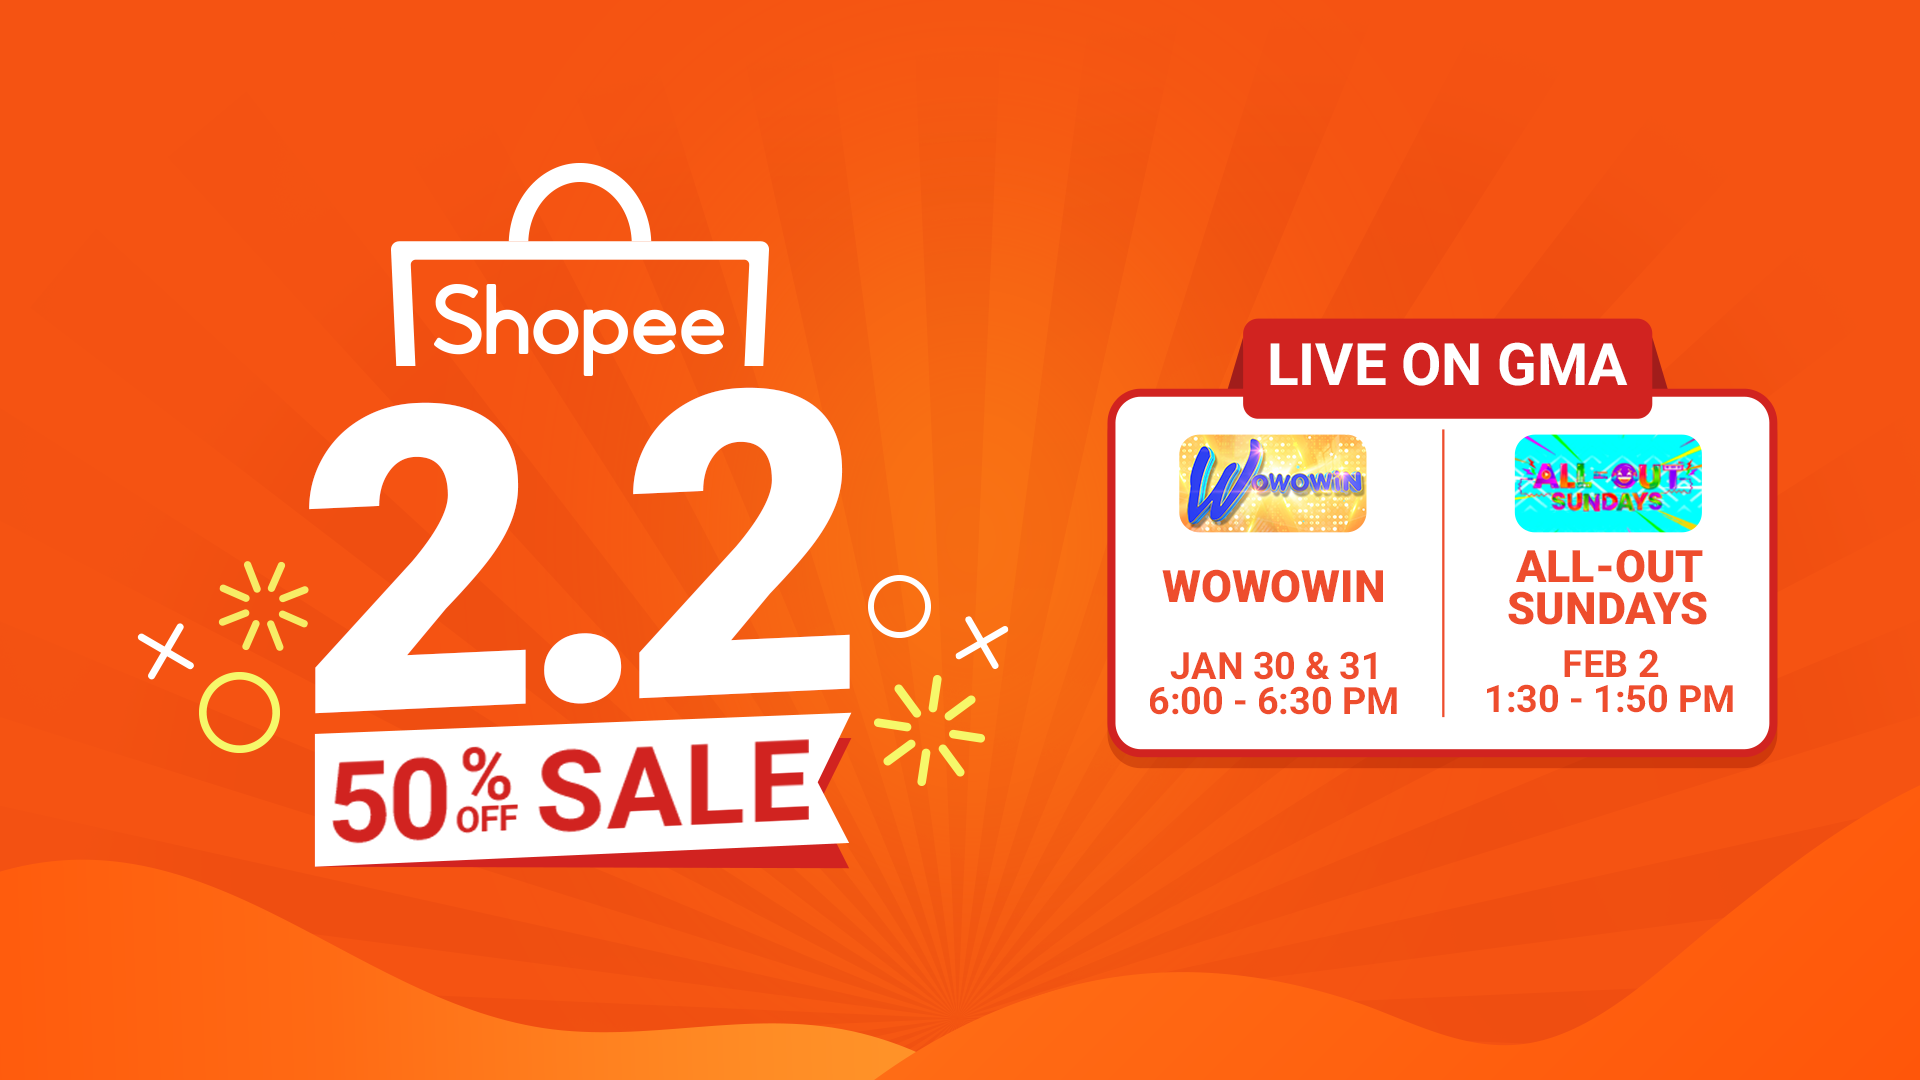 Shop and shake to win prizes live on Wowowin during the Shopee 2.2